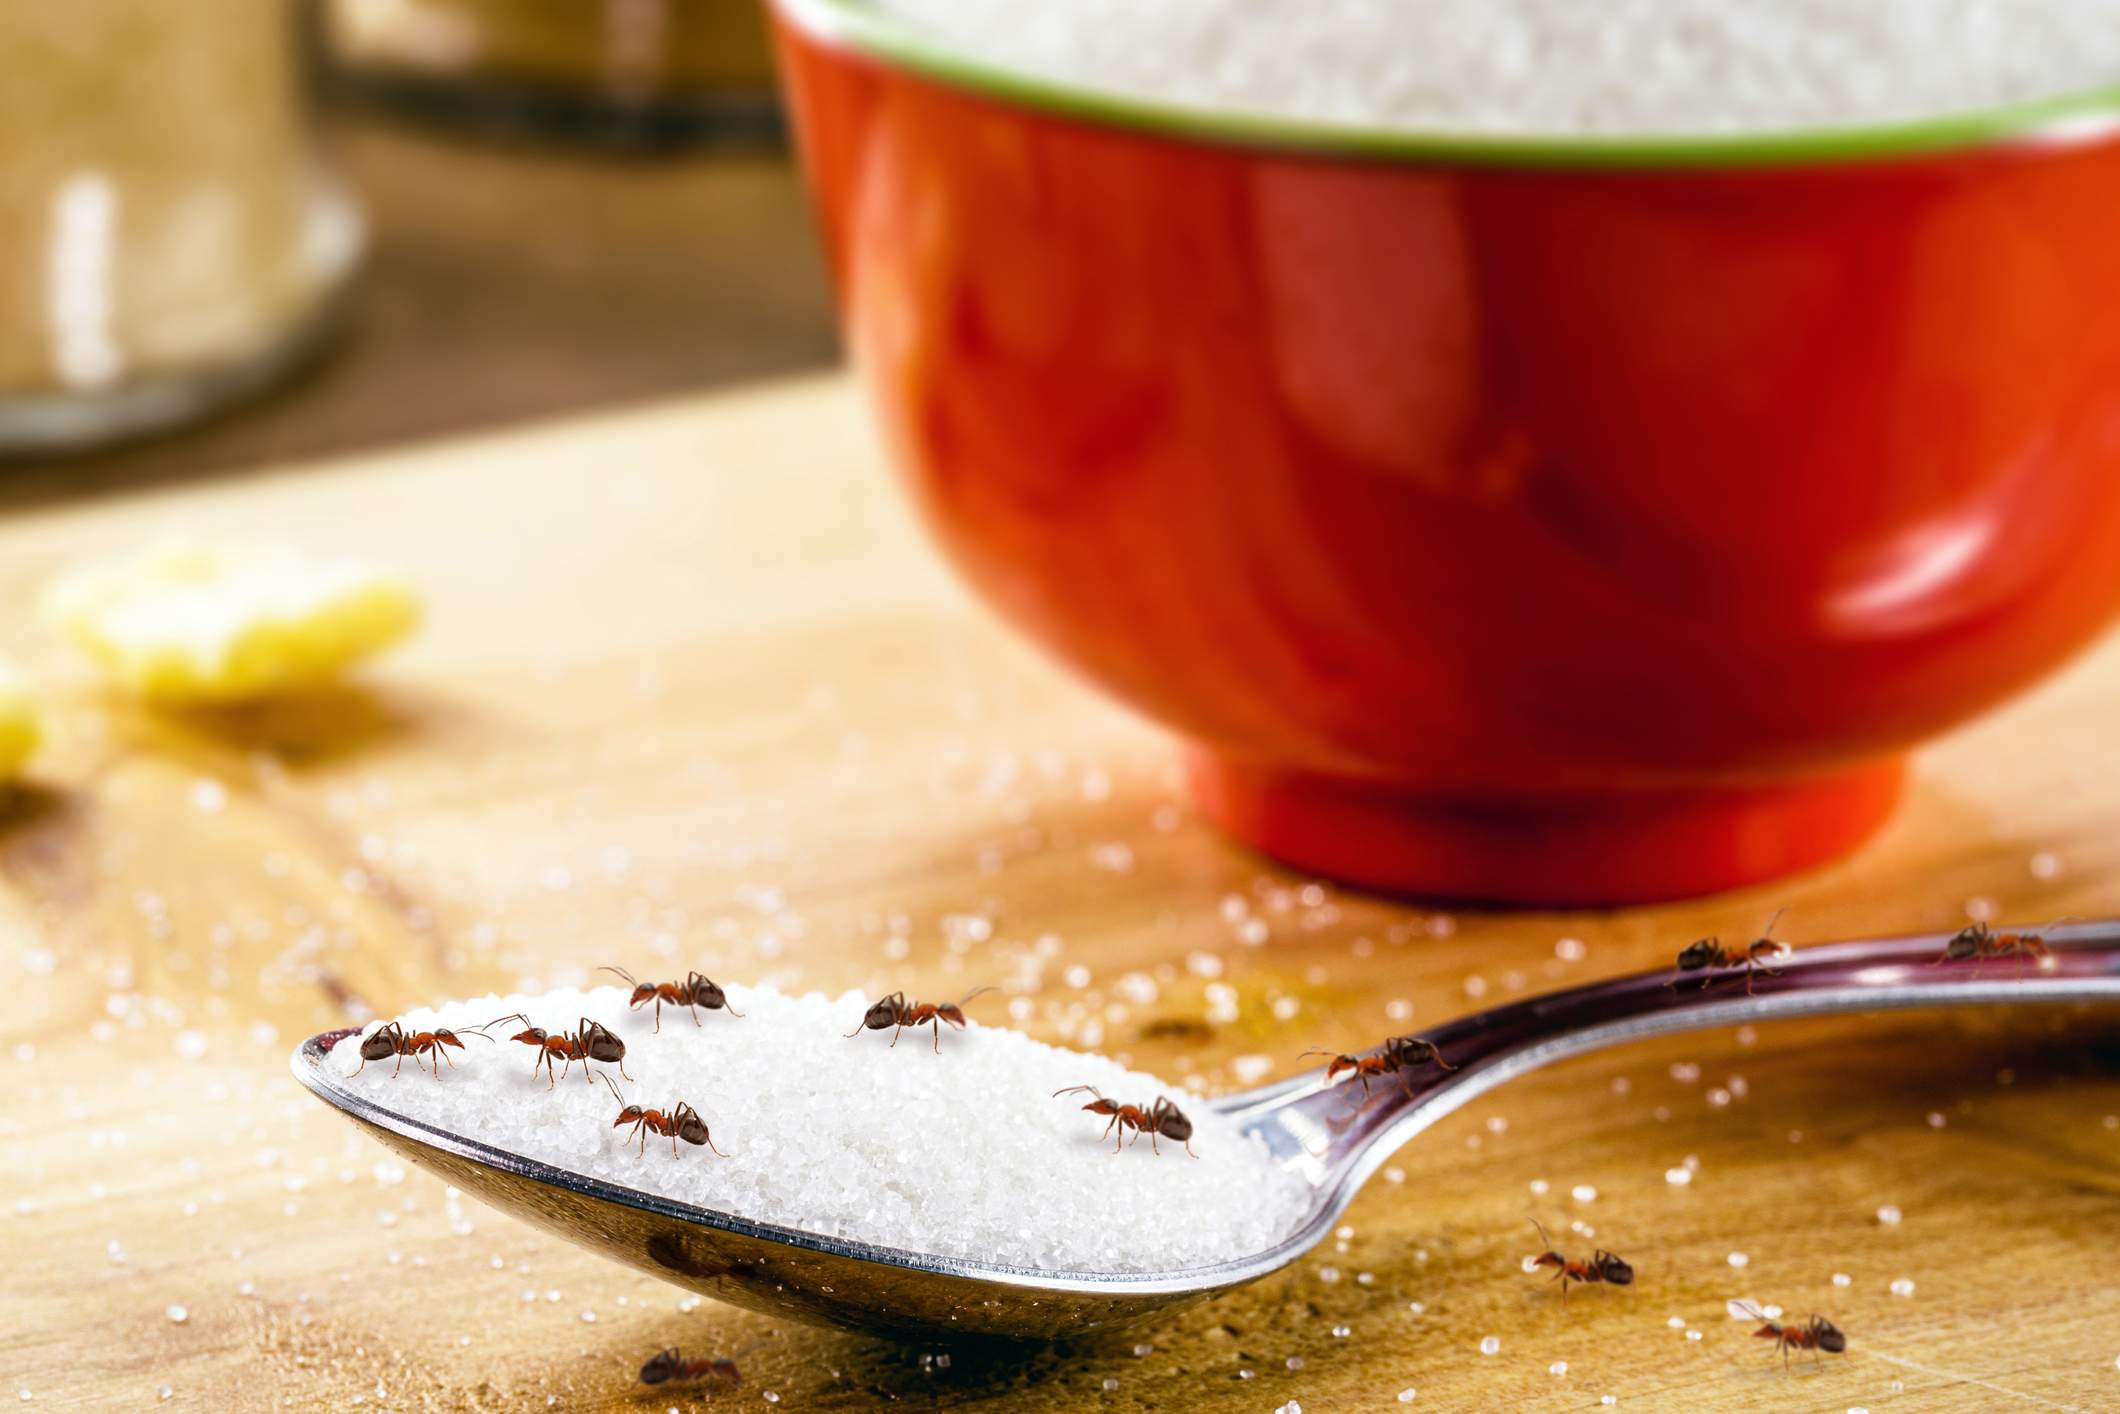 Ants crawl around on a spoonful of sugar next to a red bowl on a kitchen counter.